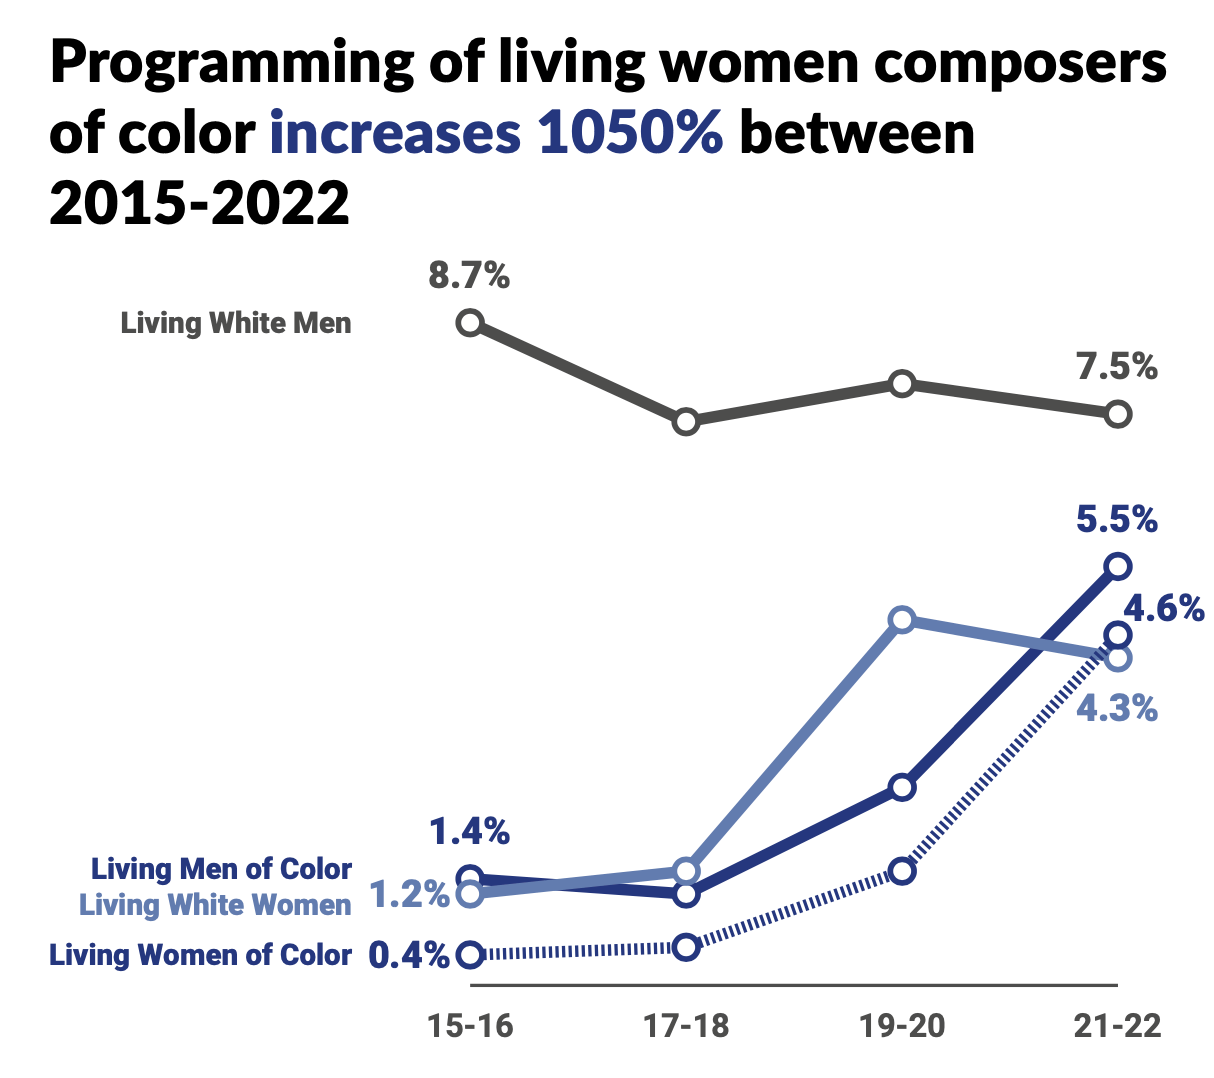 Graph showing increases in works programmed by Living Men of Colour, Living White Women, and Living Women of Colour while works programmed by Living White Men decline slightly